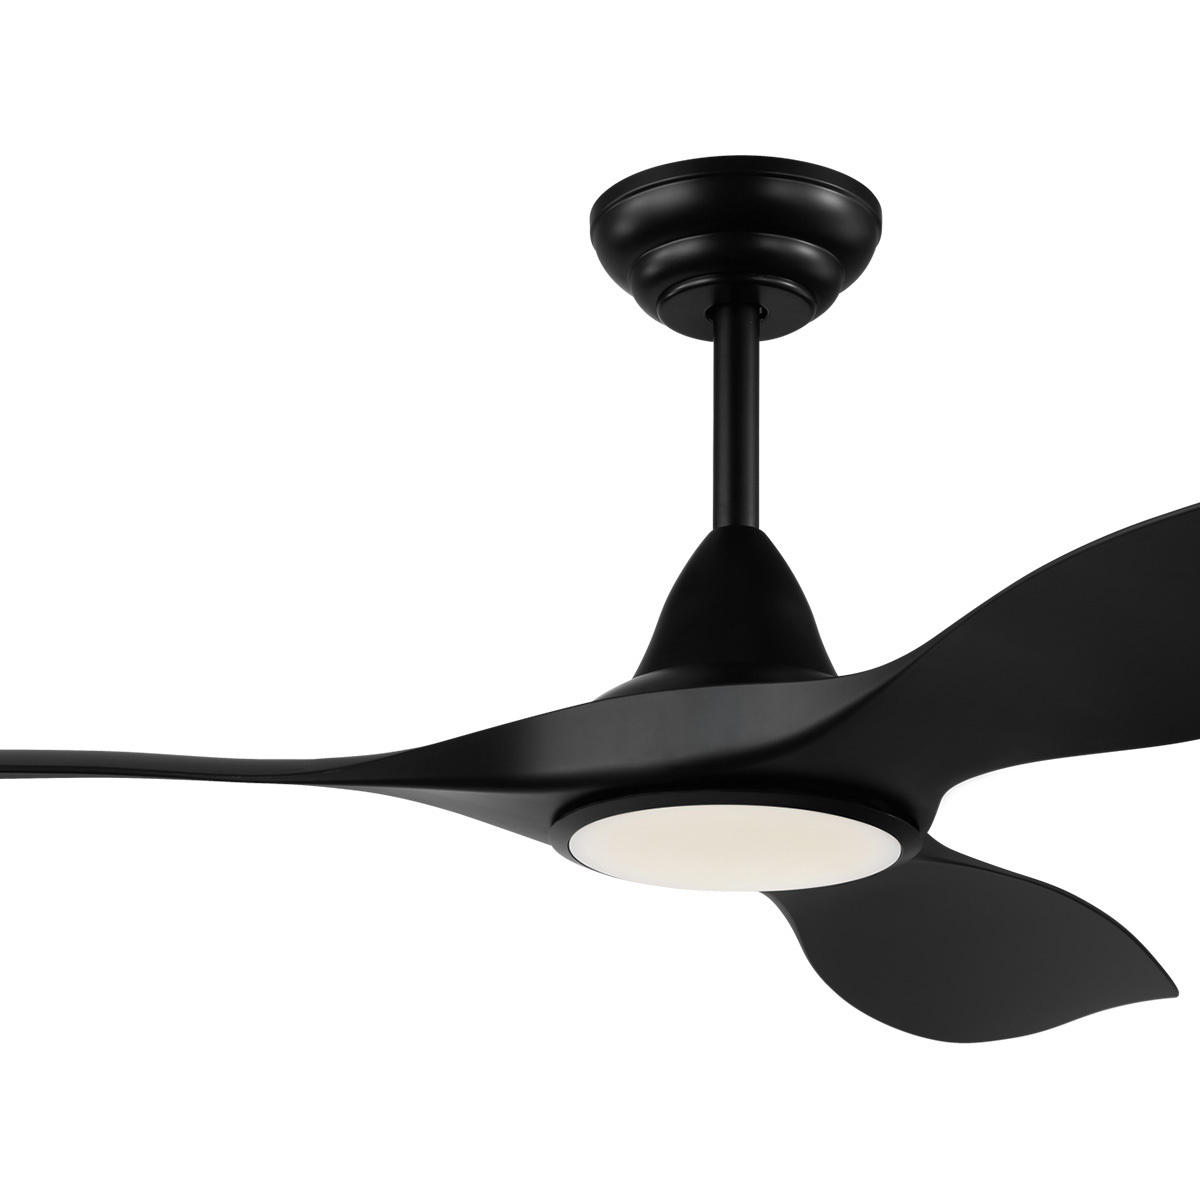 Eglo Cirali 3 Blade (132cm) Indoor Ceiling Fan with DC Motor, LED Light and Remote Control in Black 